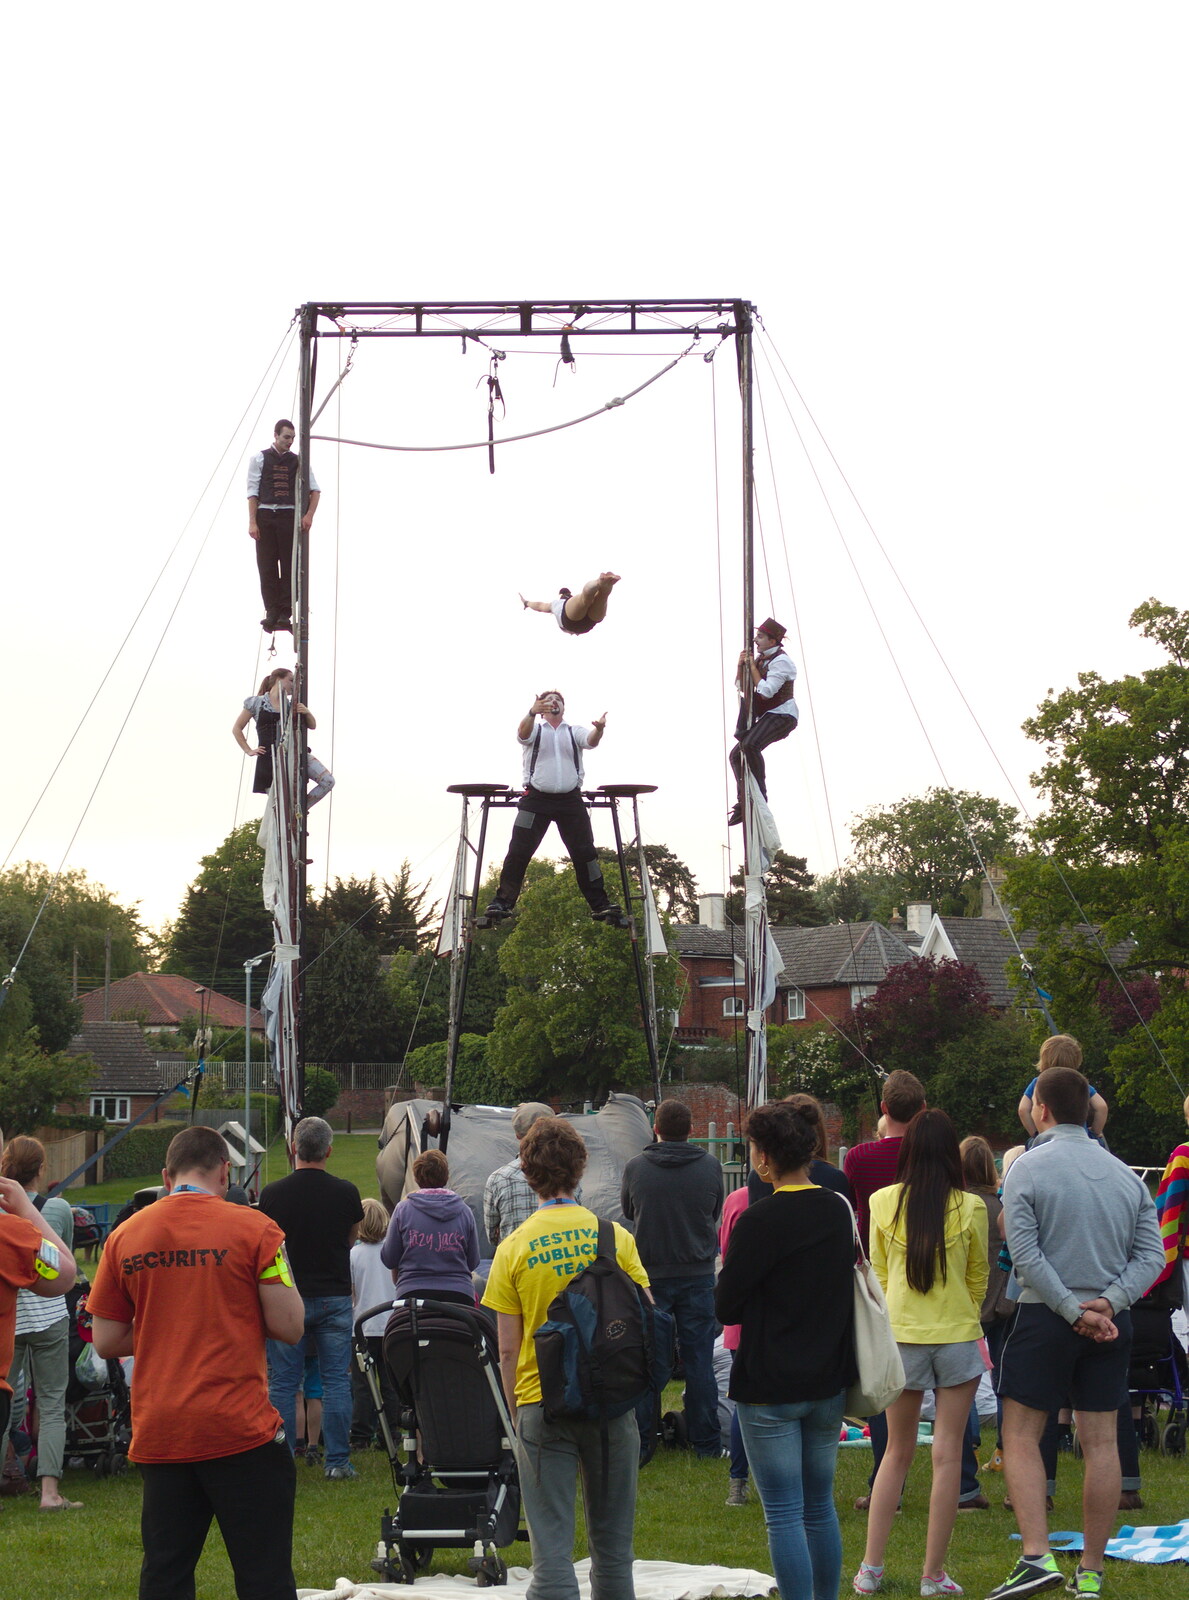 High-wire jumping from A Family Fun Day on the Park, Diss, Norfolk - 16th May 2014